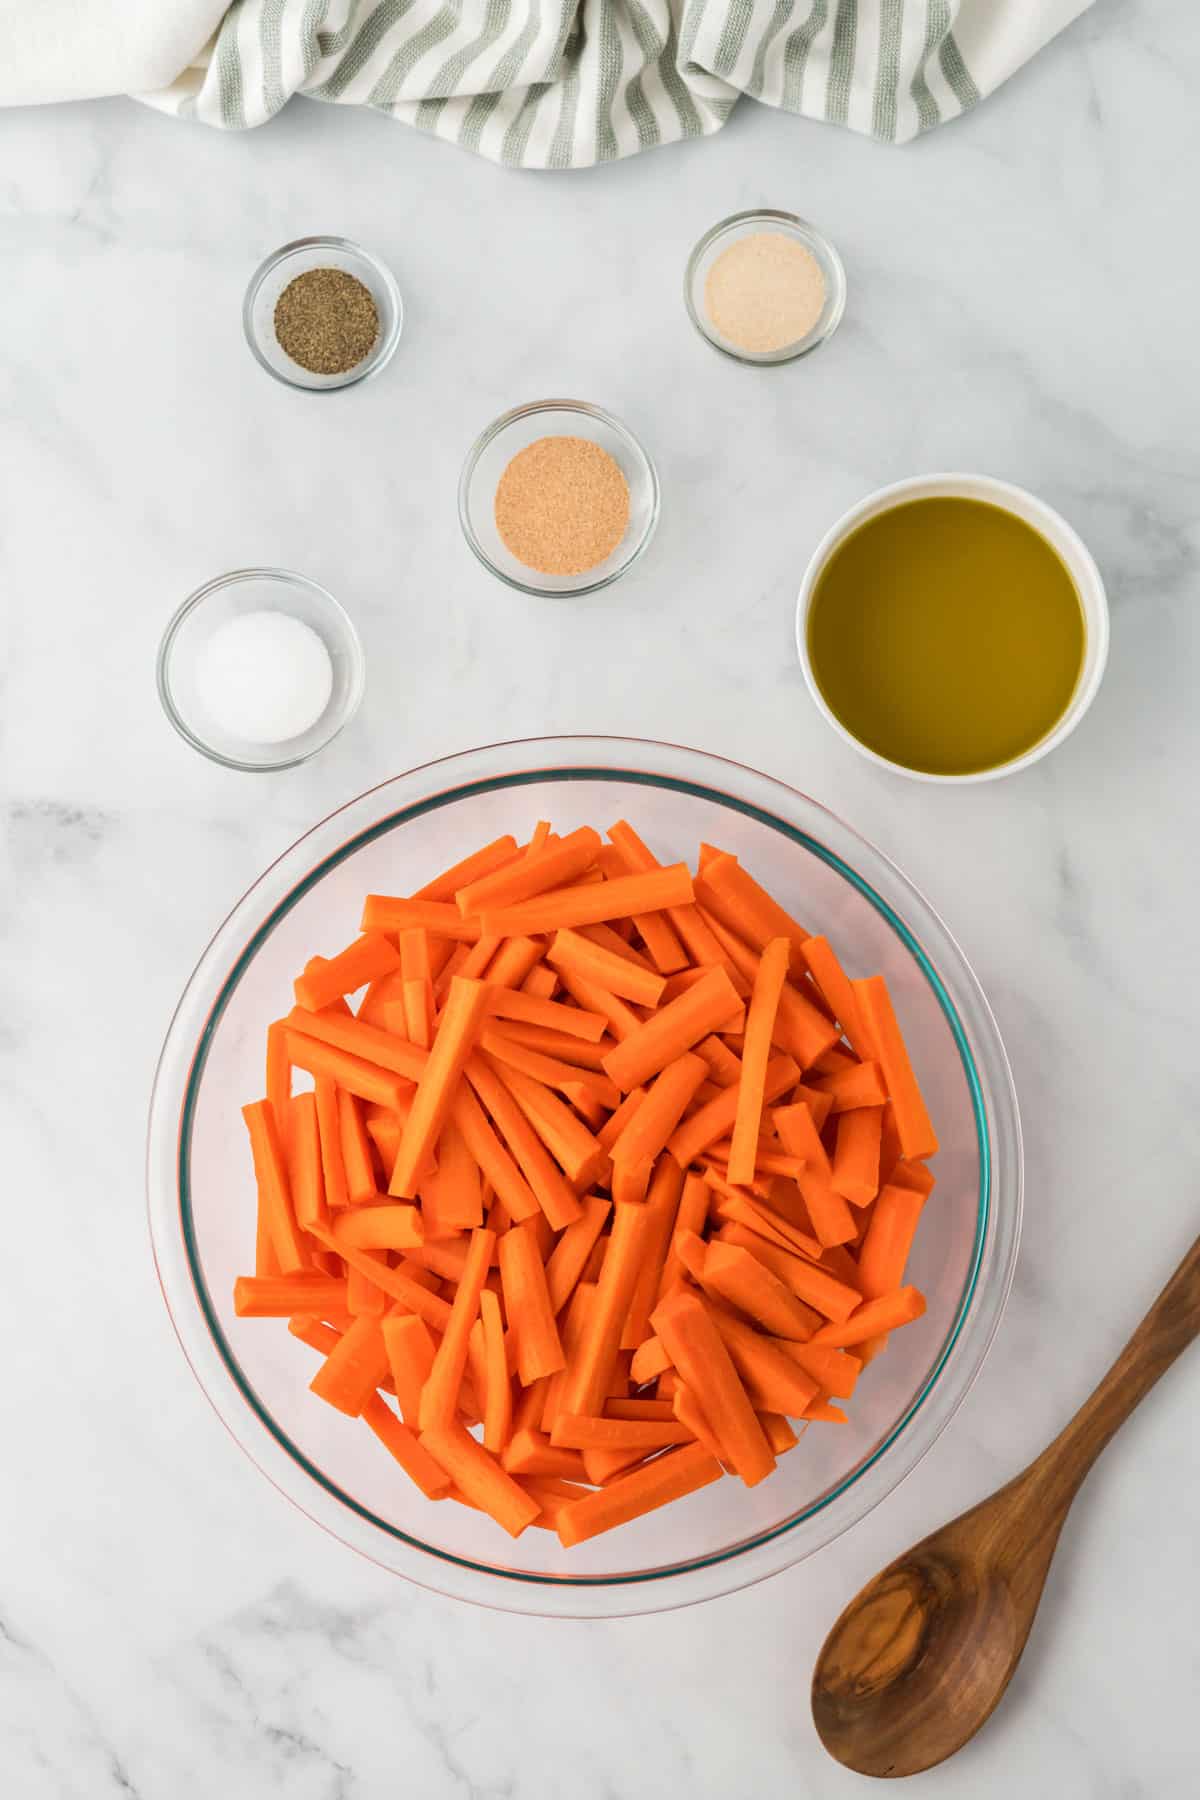 cut up carrots in a bowl with olive oil and spices in bowls next to it